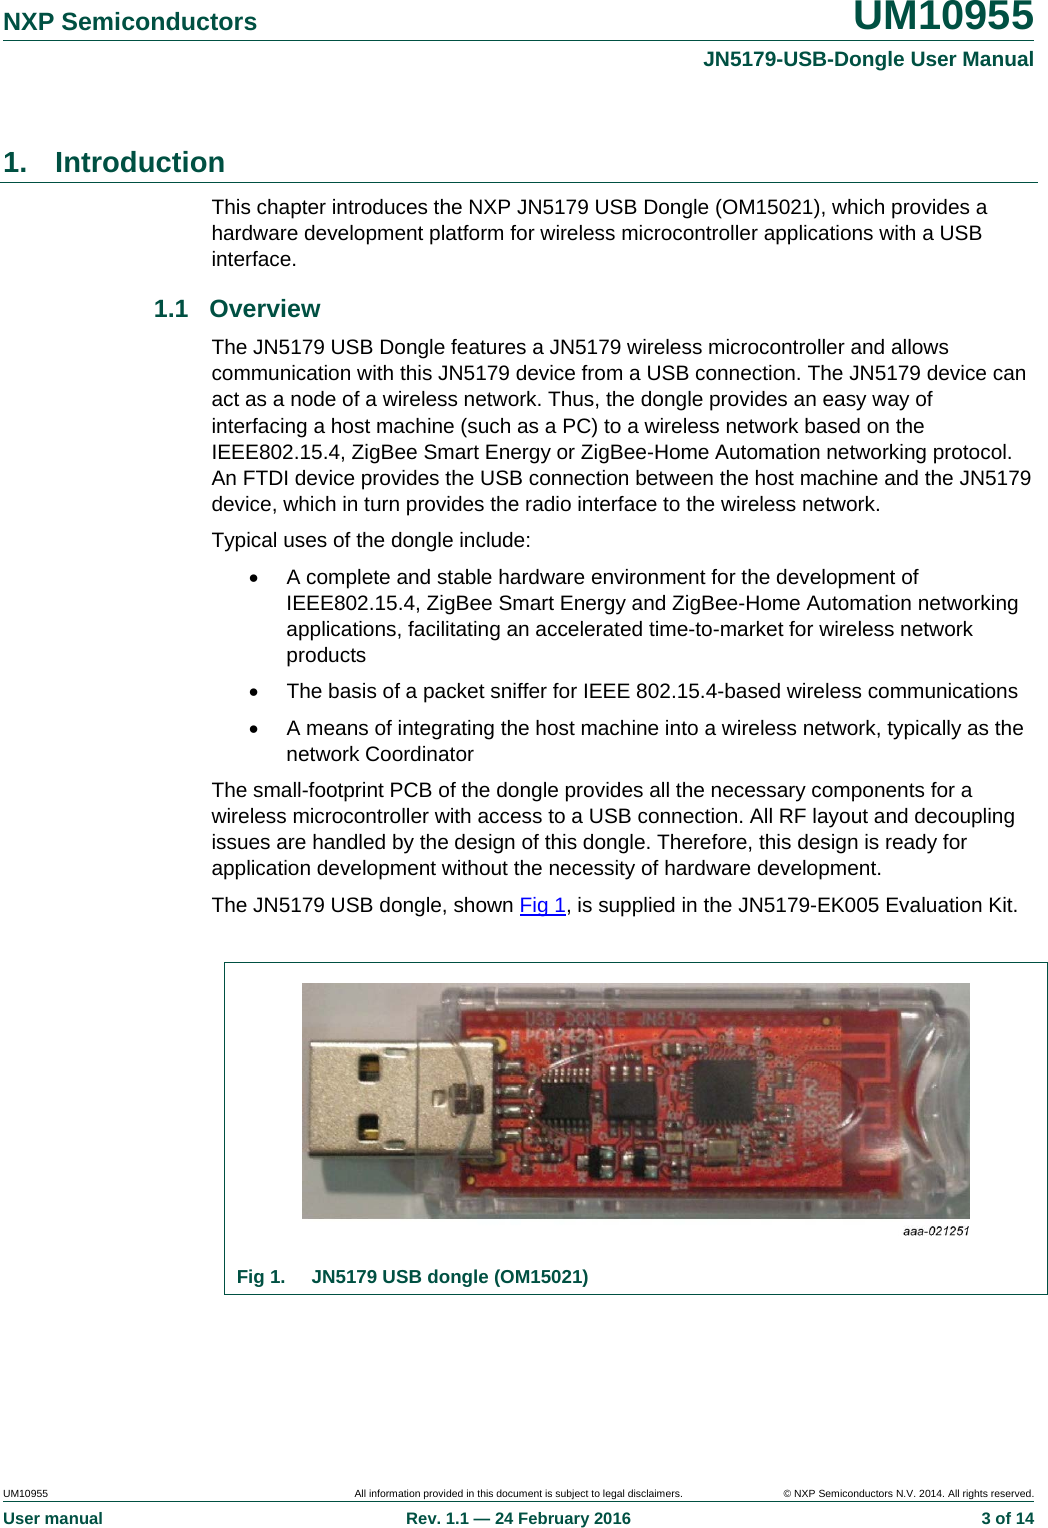   NXP Semiconductors  UM10955 JN5179-USB-Dongle User ManualUM10955  All information provided in this document is subject to legal disclaimers.  © NXP Semiconductors N.V. 2014. All rights reserved.User manual  Rev. 1.1 — 24 February 2016  3 of 141. Introduction This chapter introduces the NXP JN5179 USB Dongle (OM15021), which provides a hardware development platform for wireless microcontroller applications with a USB interface. 1.1 Overview The JN5179 USB Dongle features a JN5179 wireless microcontroller and allows communication with this JN5179 device from a USB connection. The JN5179 device can act as a node of a wireless network. Thus, the dongle provides an easy way of interfacing a host machine (such as a PC) to a wireless network based on the IEEE802.15.4, ZigBee Smart Energy or ZigBee-Home Automation networking protocol. An FTDI device provides the USB connection between the host machine and the JN5179 device, which in turn provides the radio interface to the wireless network. Typical uses of the dongle include:   A complete and stable hardware environment for the development of IEEE802.15.4, ZigBee Smart Energy and ZigBee-Home Automation networking applications, facilitating an accelerated time-to-market for wireless network products   The basis of a packet sniffer for IEEE 802.15.4-based wireless communications   A means of integrating the host machine into a wireless network, typically as the network Coordinator The small-footprint PCB of the dongle provides all the necessary components for a wireless microcontroller with access to a USB connection. All RF layout and decoupling issues are handled by the design of this dongle. Therefore, this design is ready for application development without the necessity of hardware development. The JN5179 USB dongle, shown Fig 1, is supplied in the JN5179-EK005 Evaluation Kit.   Fig 1.  JN5179 USB dongle (OM15021)  